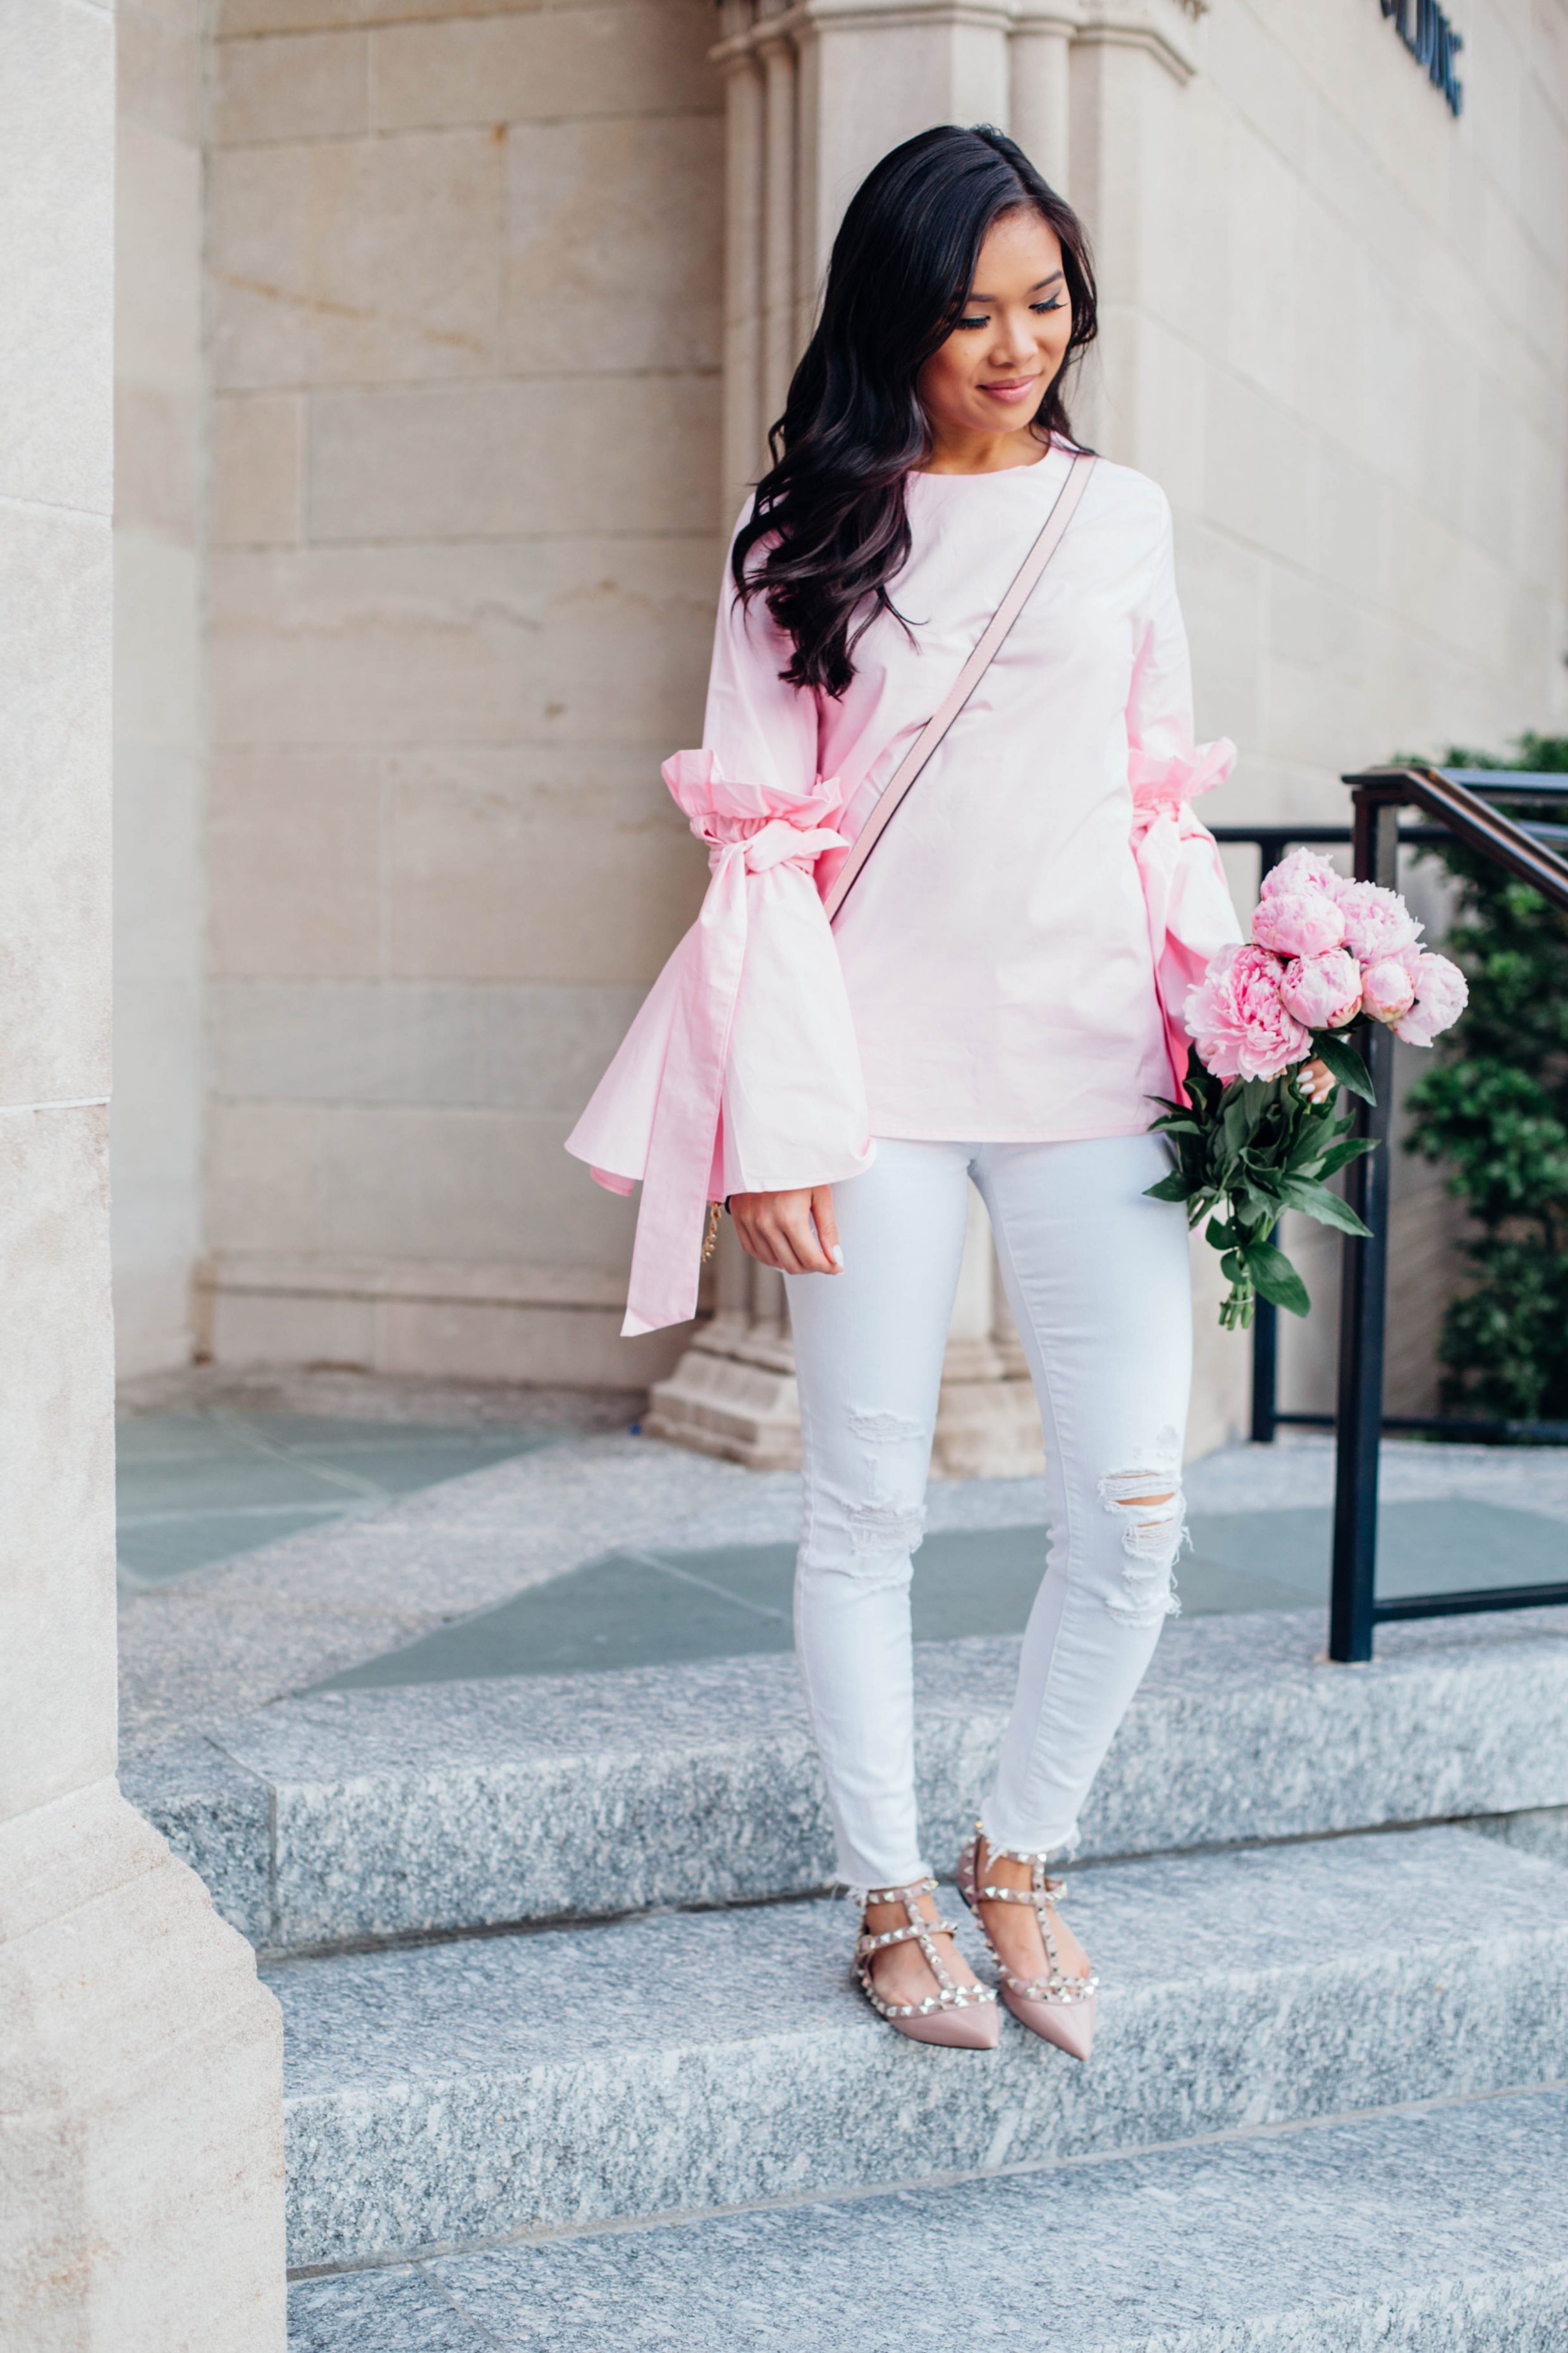 COLOR & CHIC | Dramatic Bell Sleeve Top with White Jeans